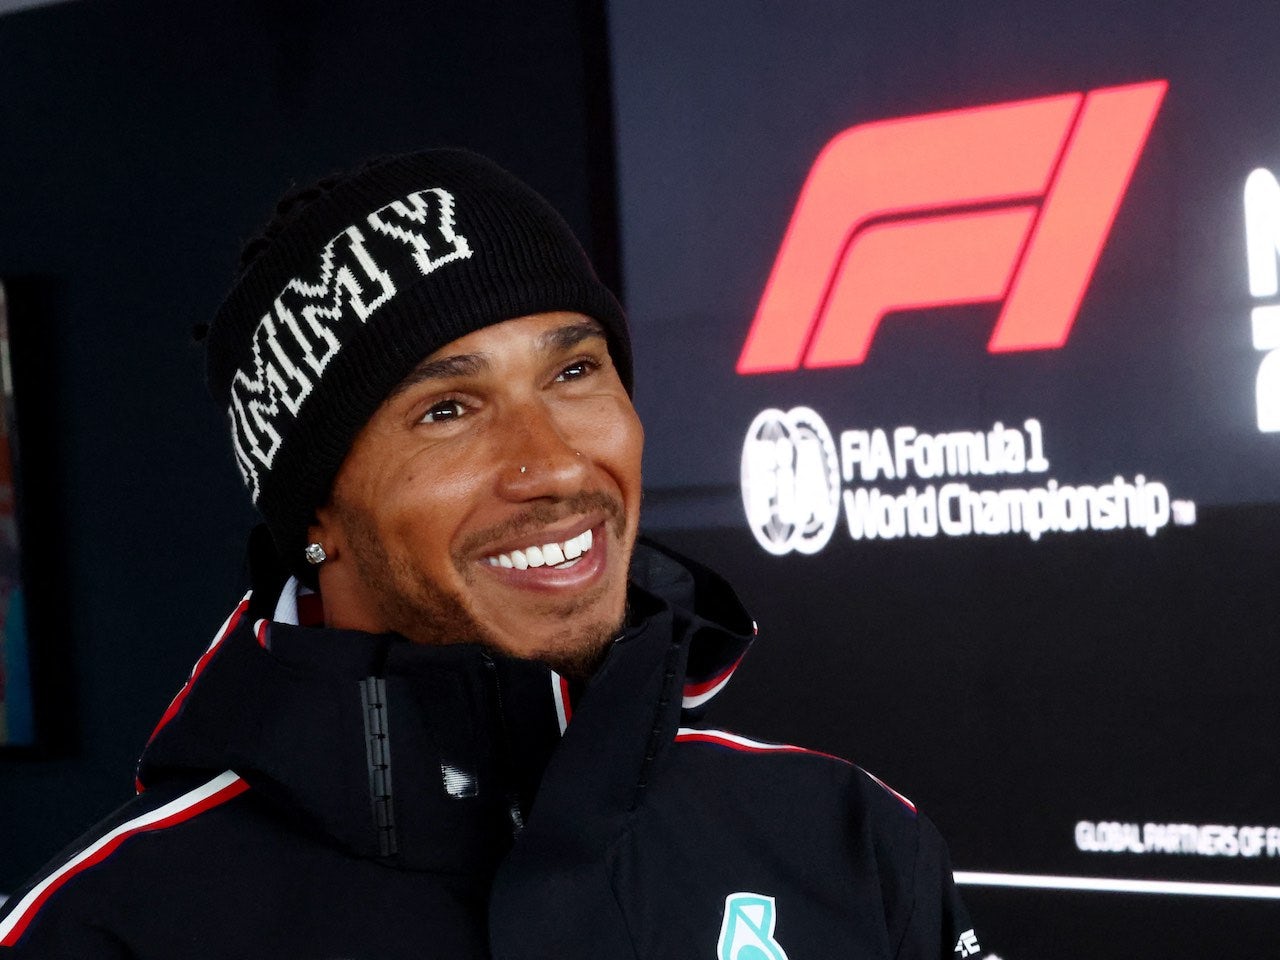 New Mercedes deal 'just taking time' - Hamilton